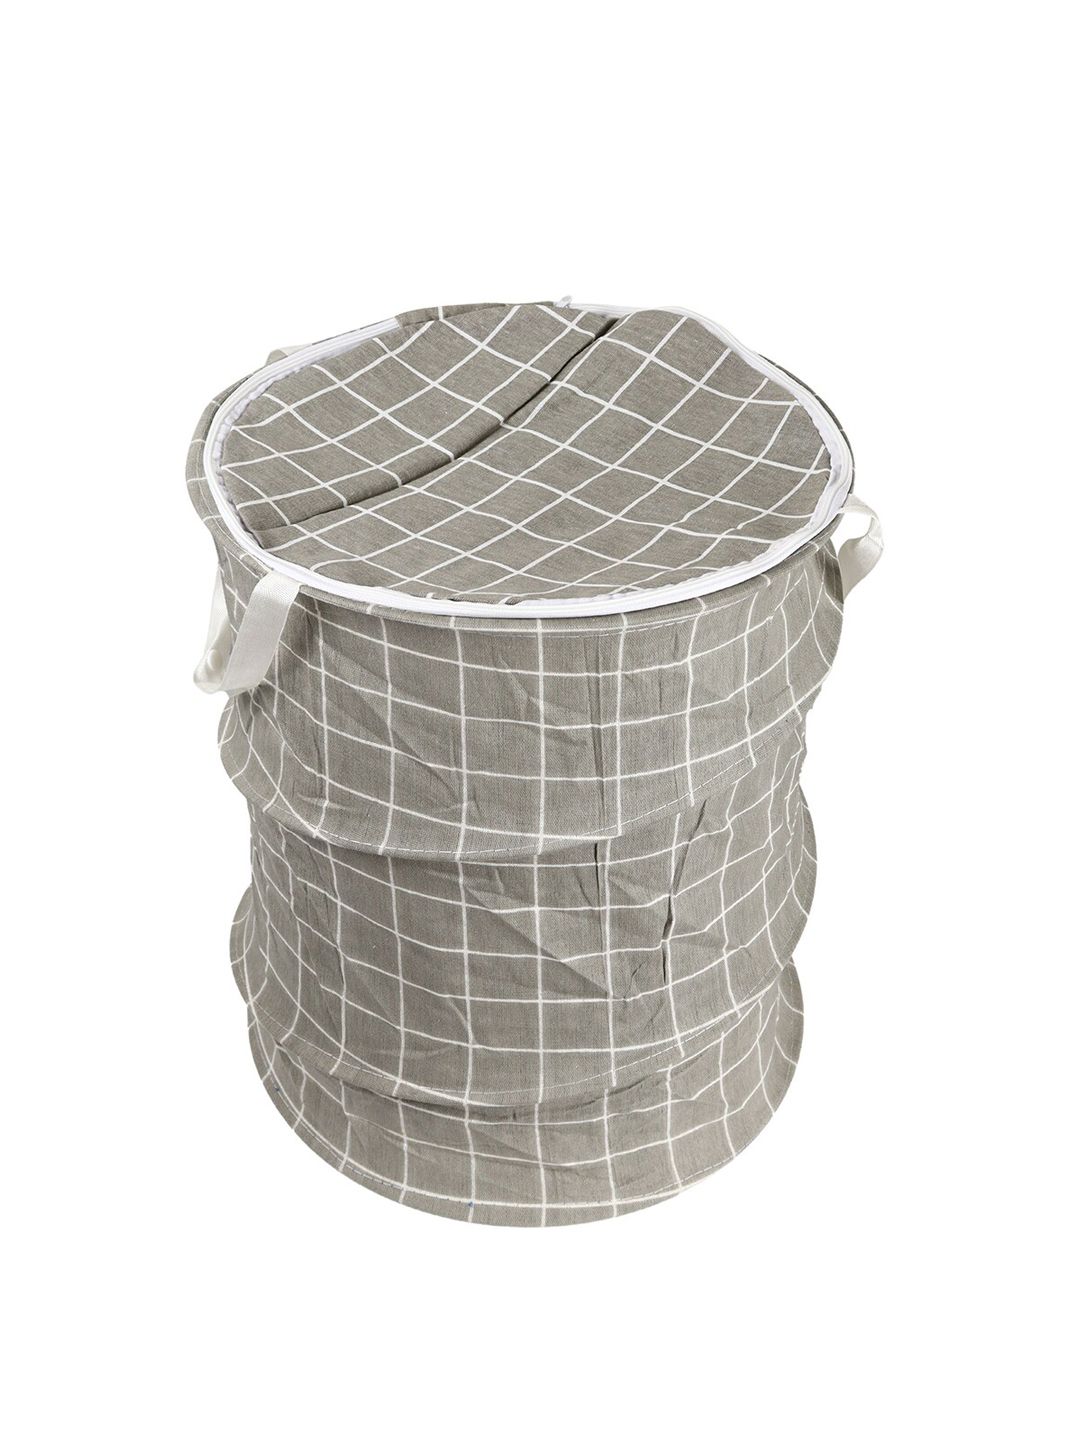 OddCroft Grey & White Checkered Foldable Laundry Basket Price in India